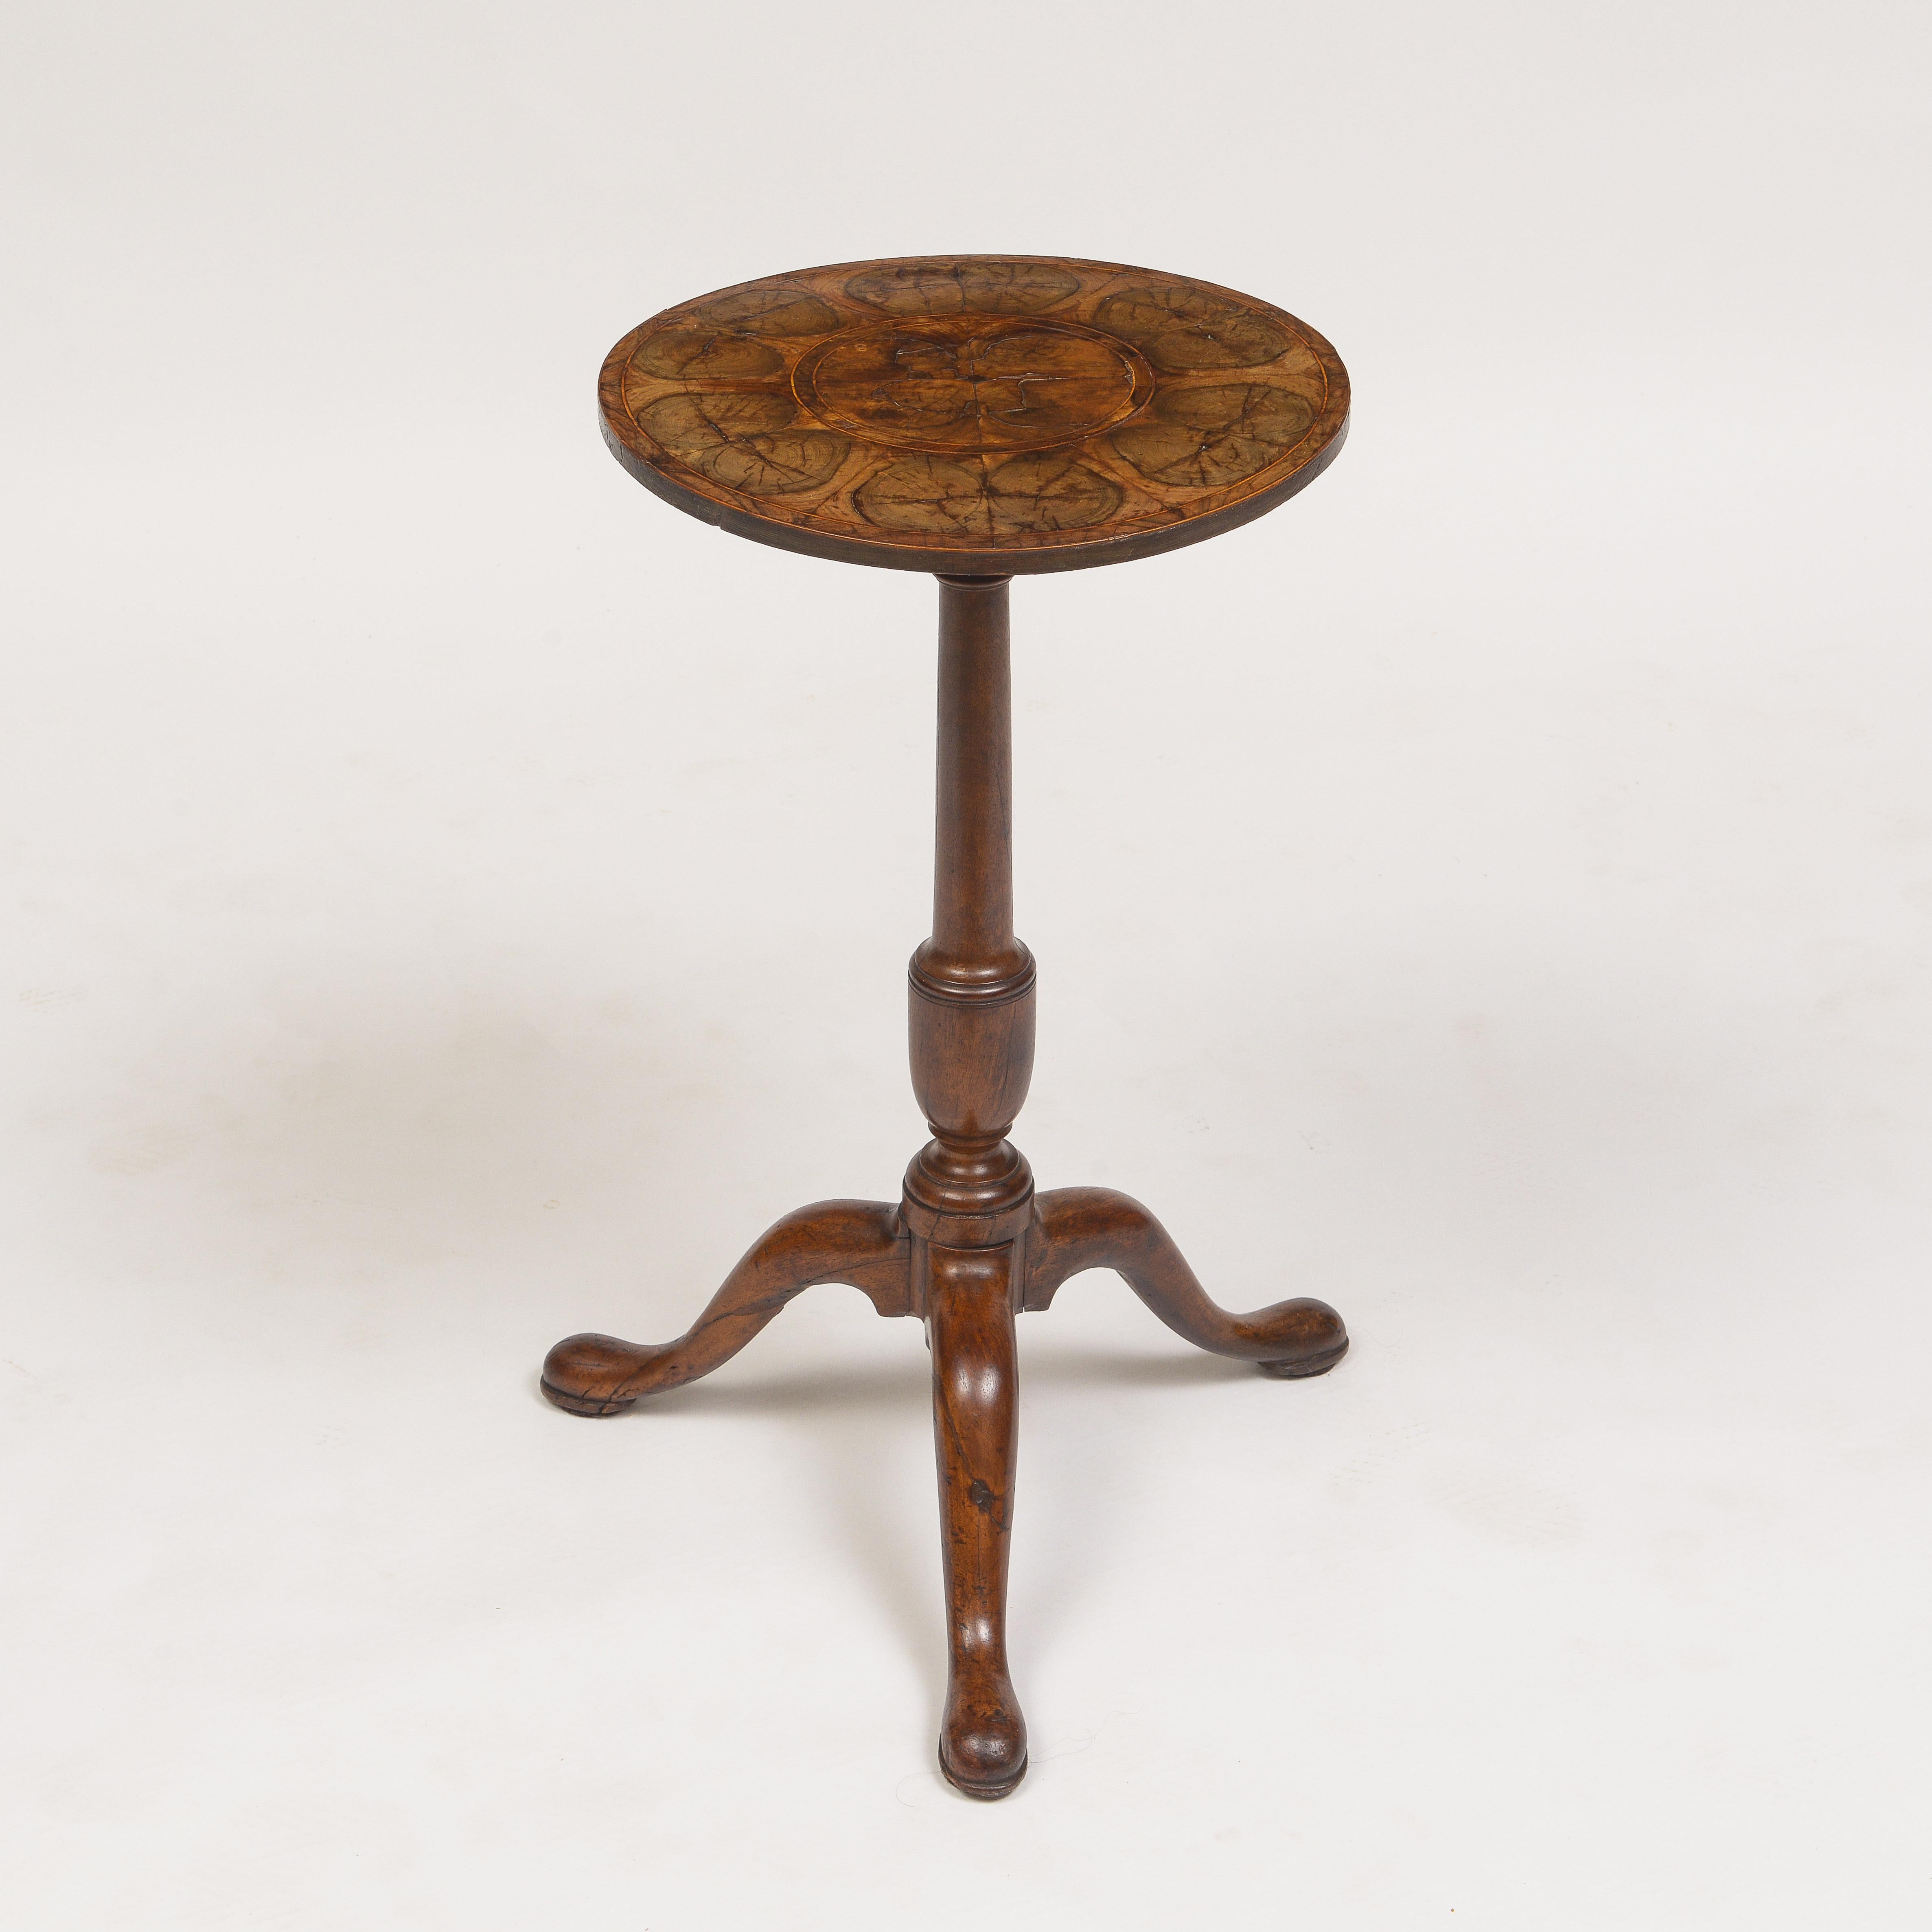 Beautiful oyster-wood and box wood inlayed top supported with a walnut tripod base.